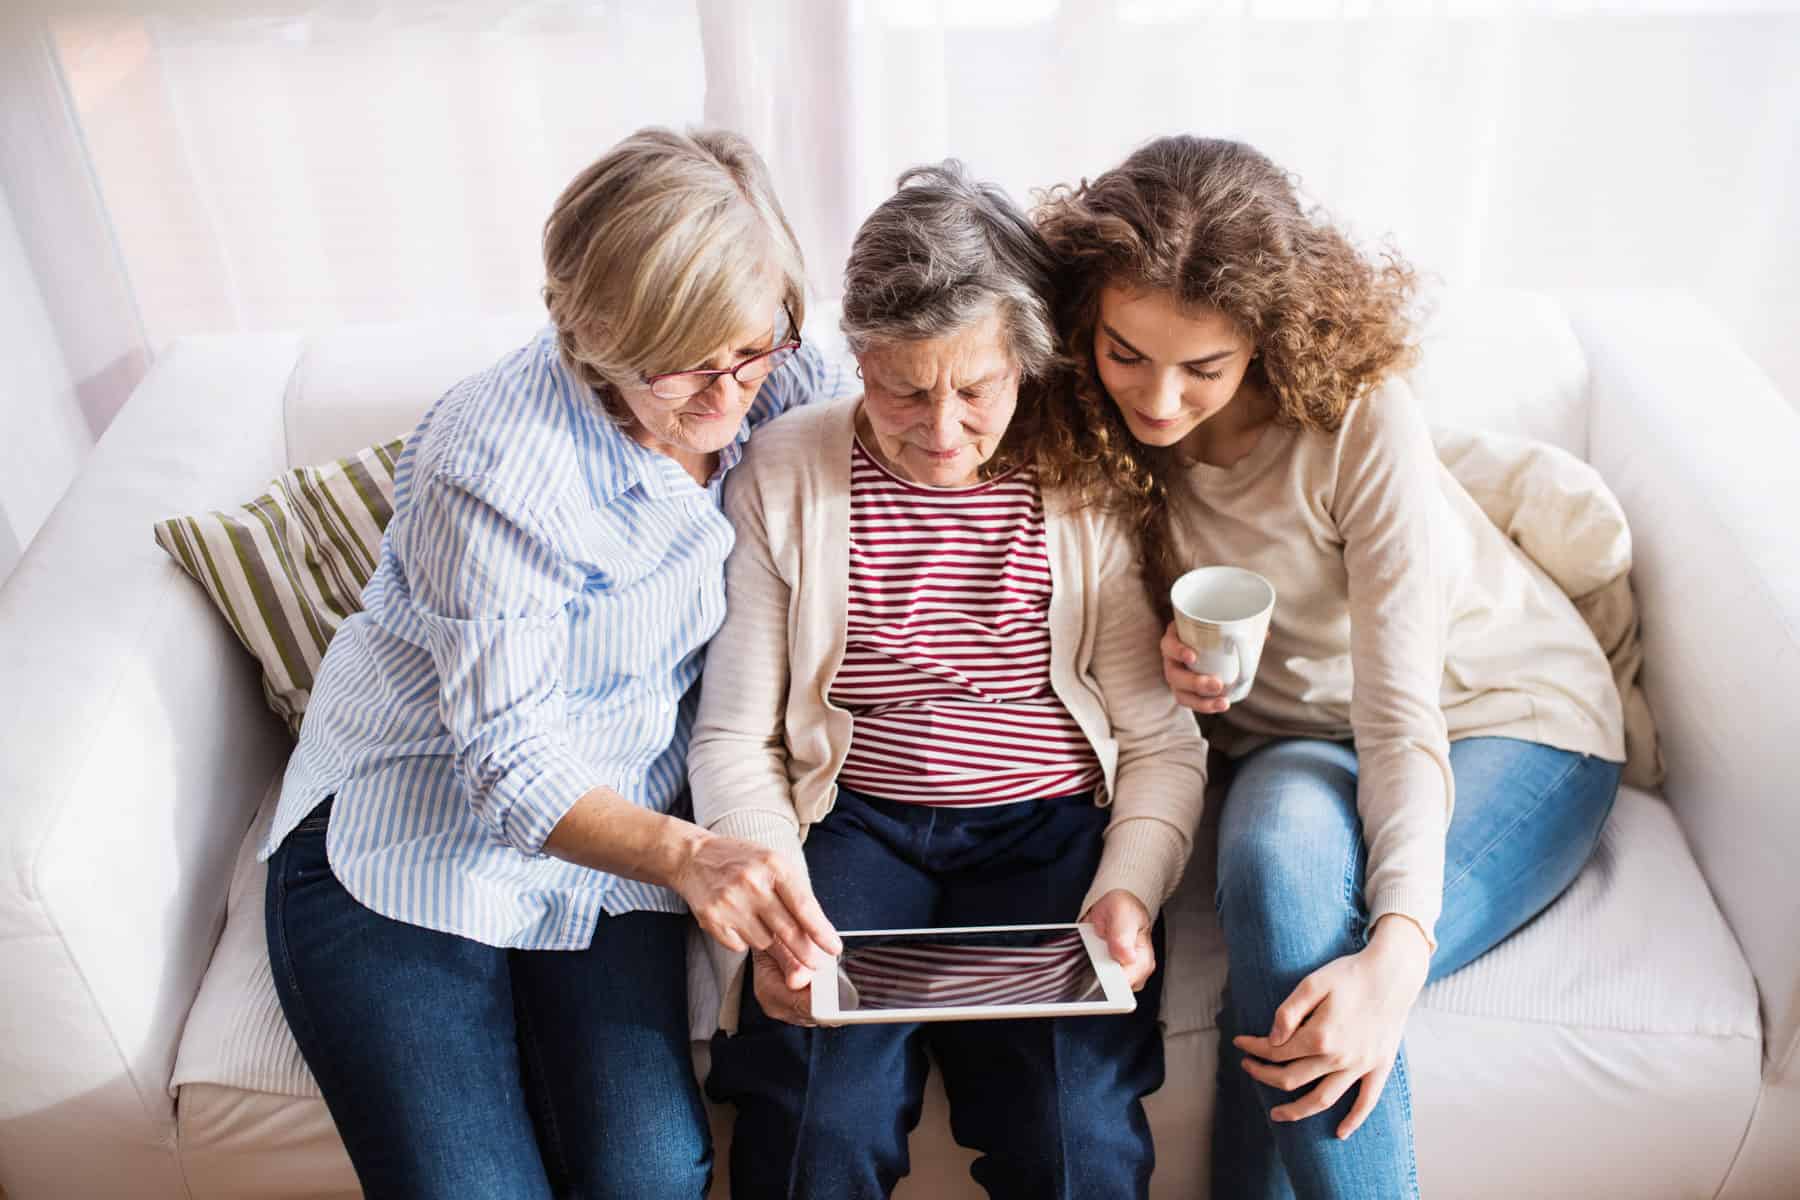 A Teenage Girl, Mother And Grandmother With Tablet At Home.